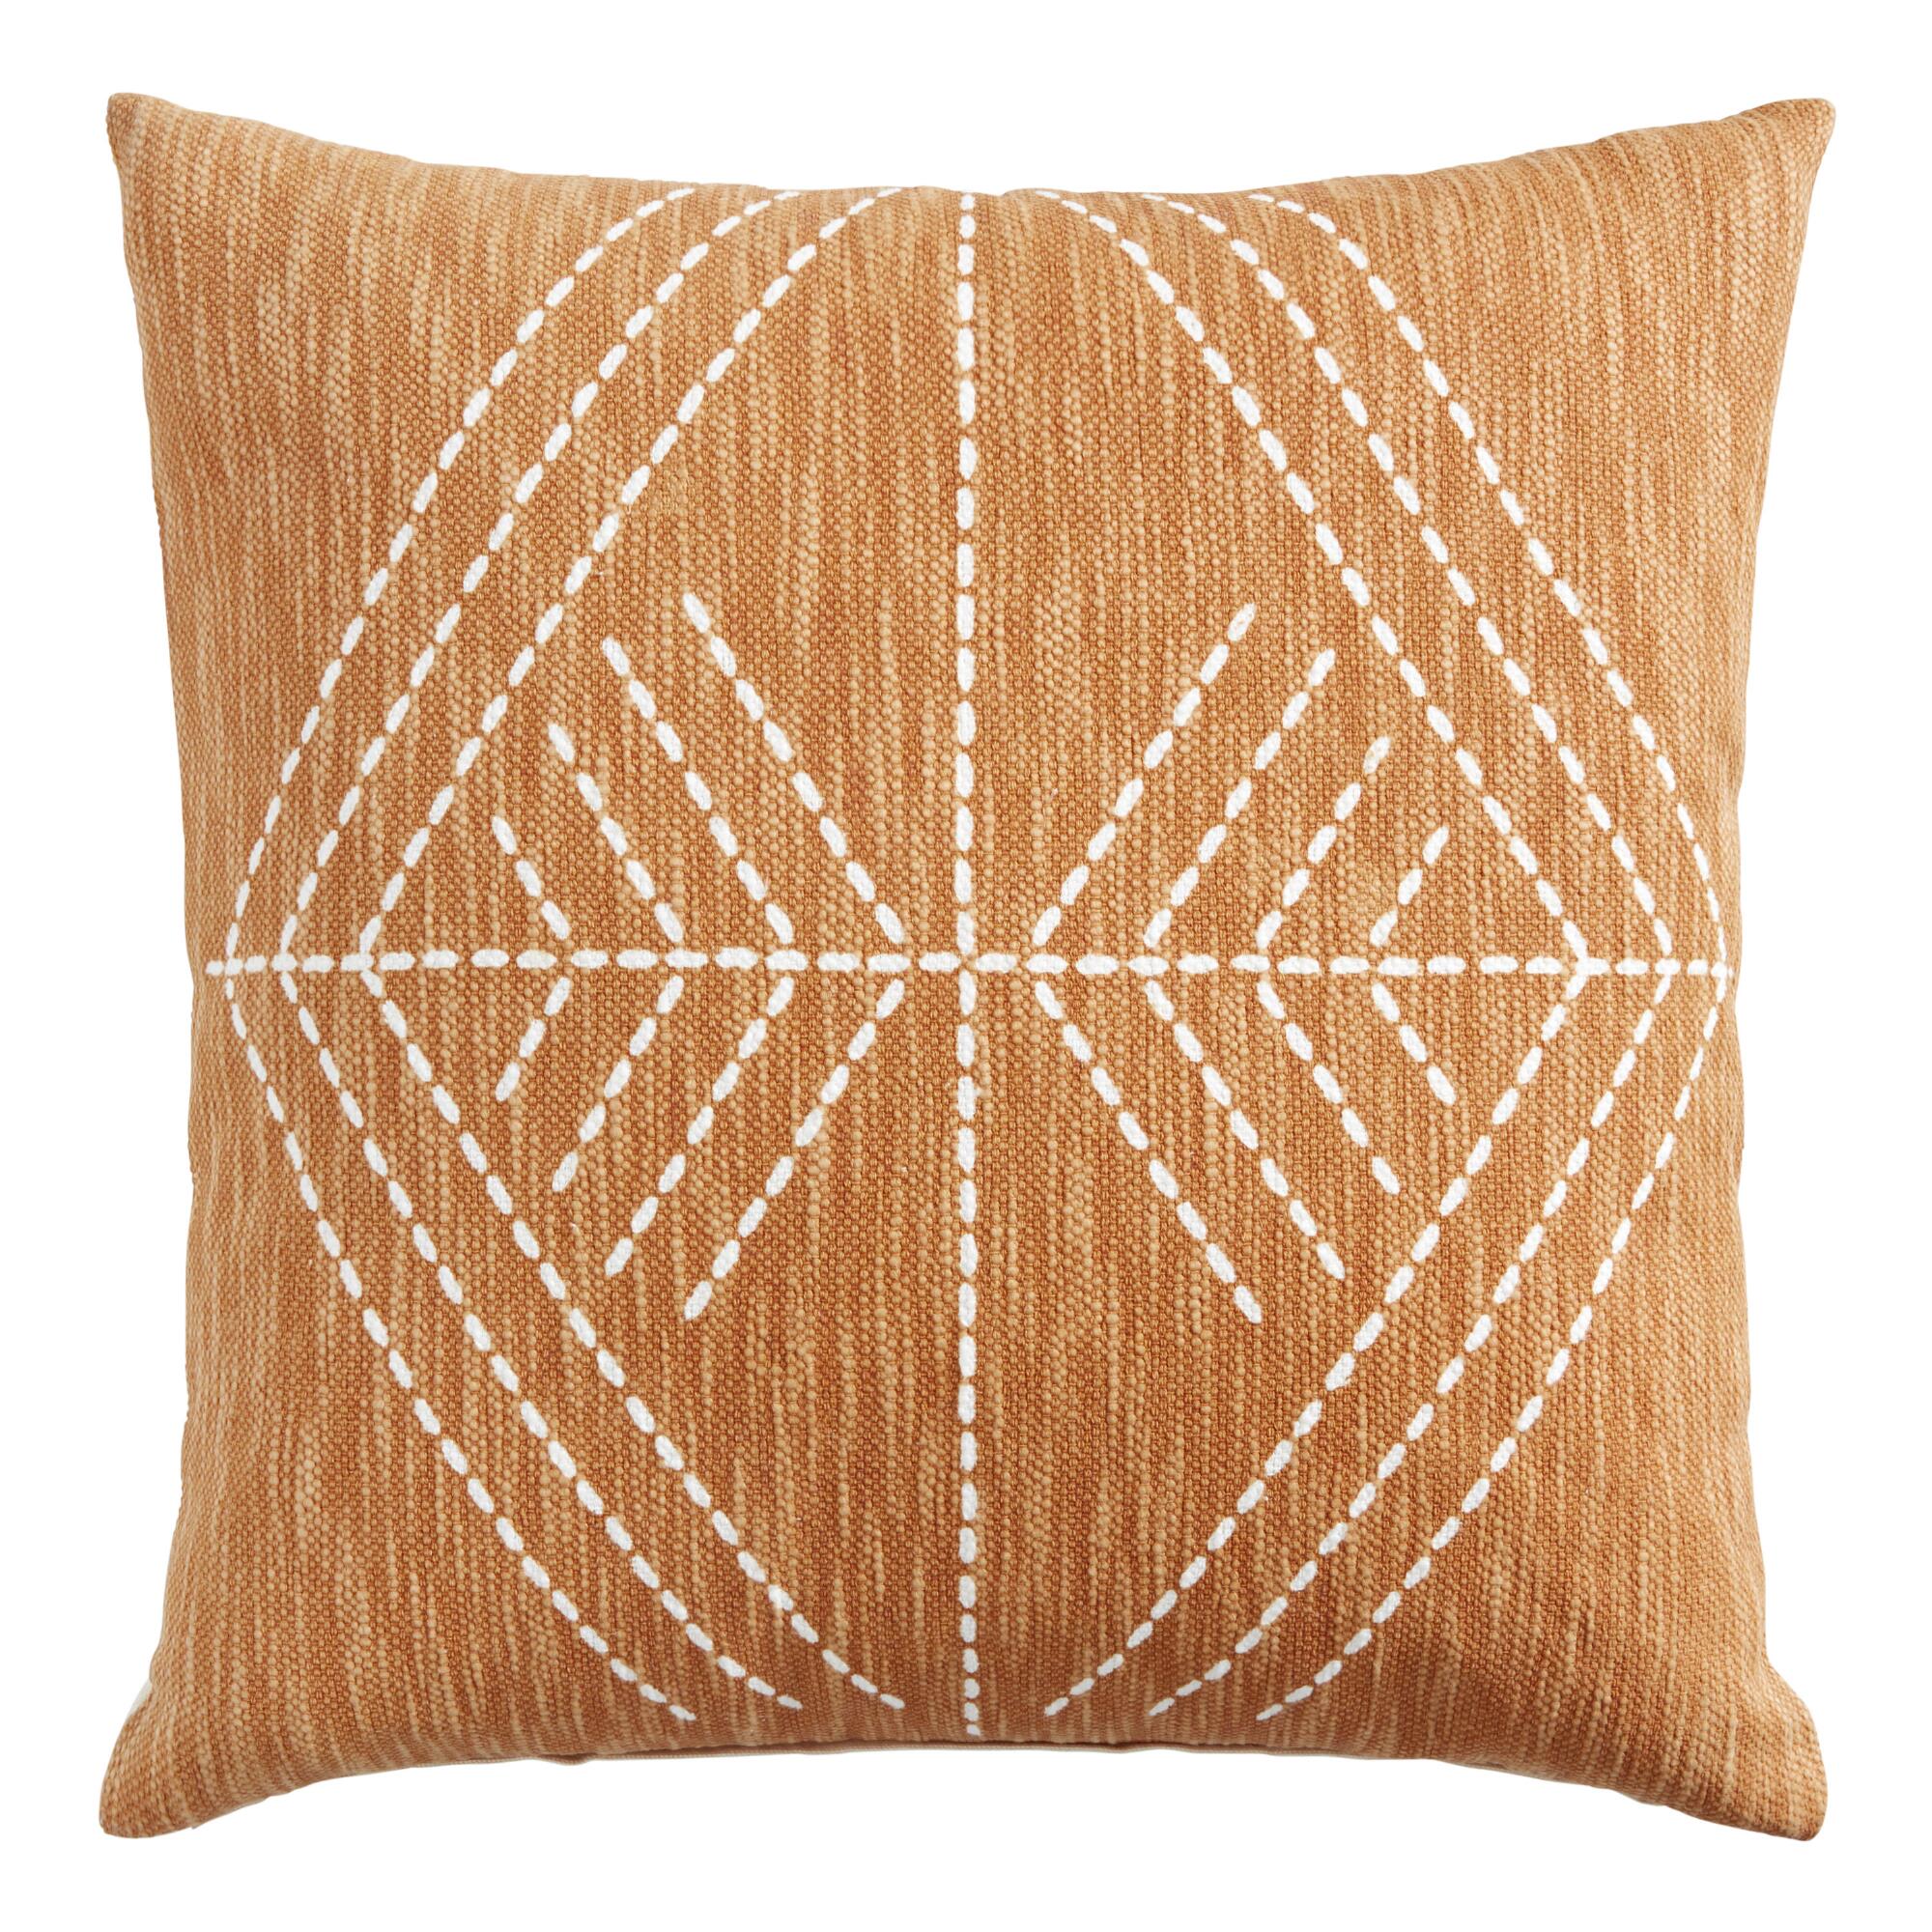 Rust Geo Printed Throw Pillow by World Market